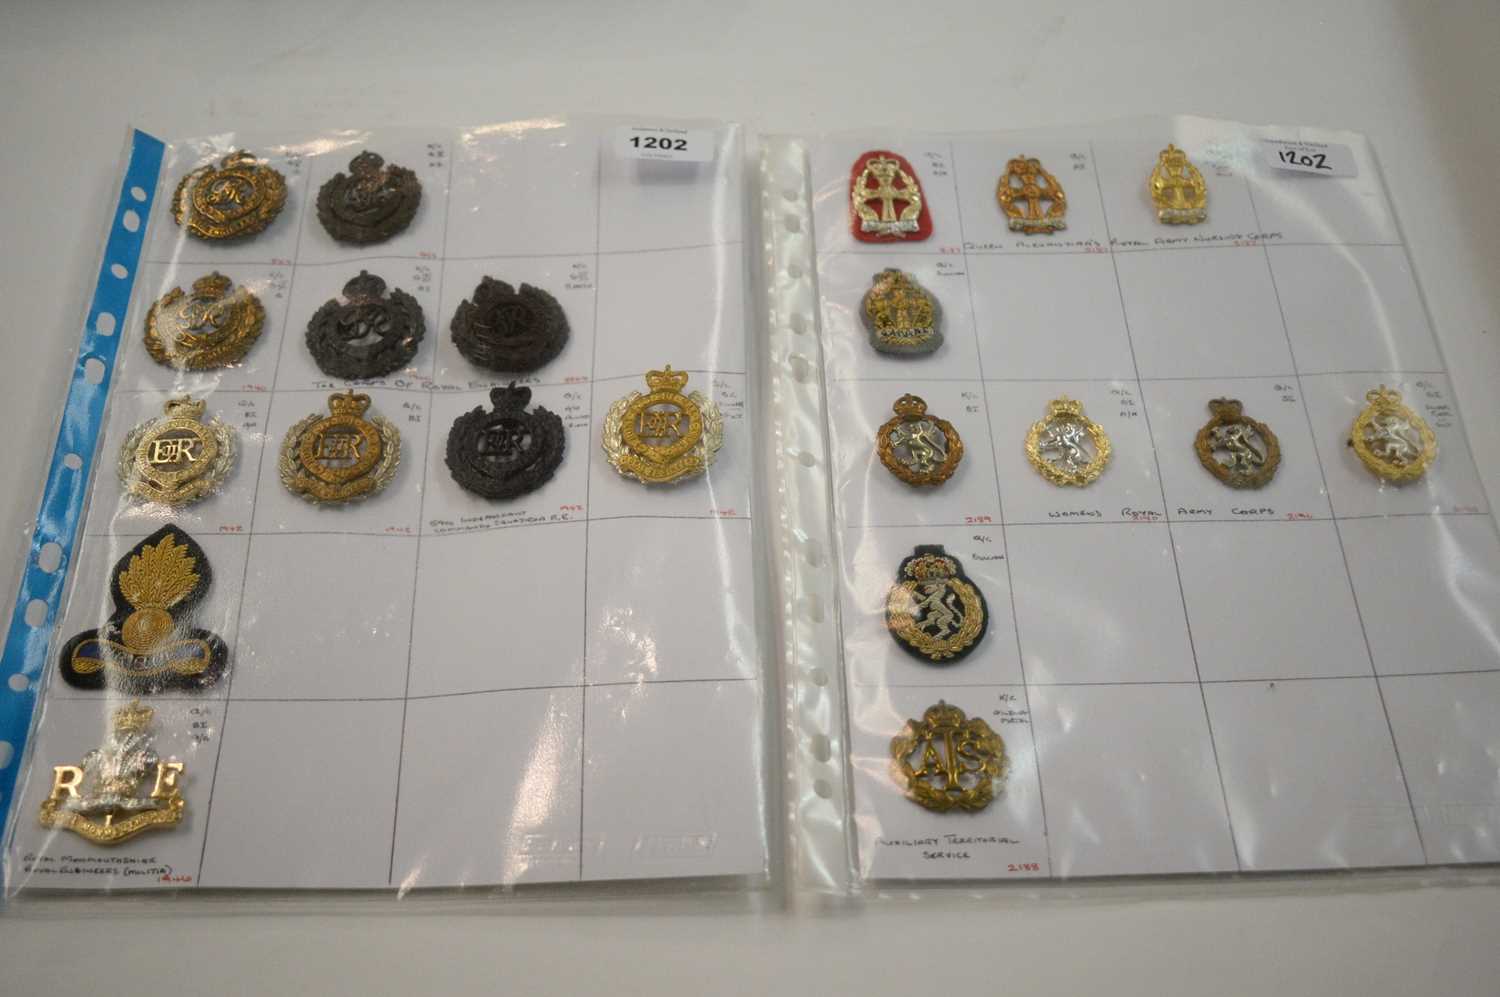 Lot 1202 - A collection of 21 cap badges.